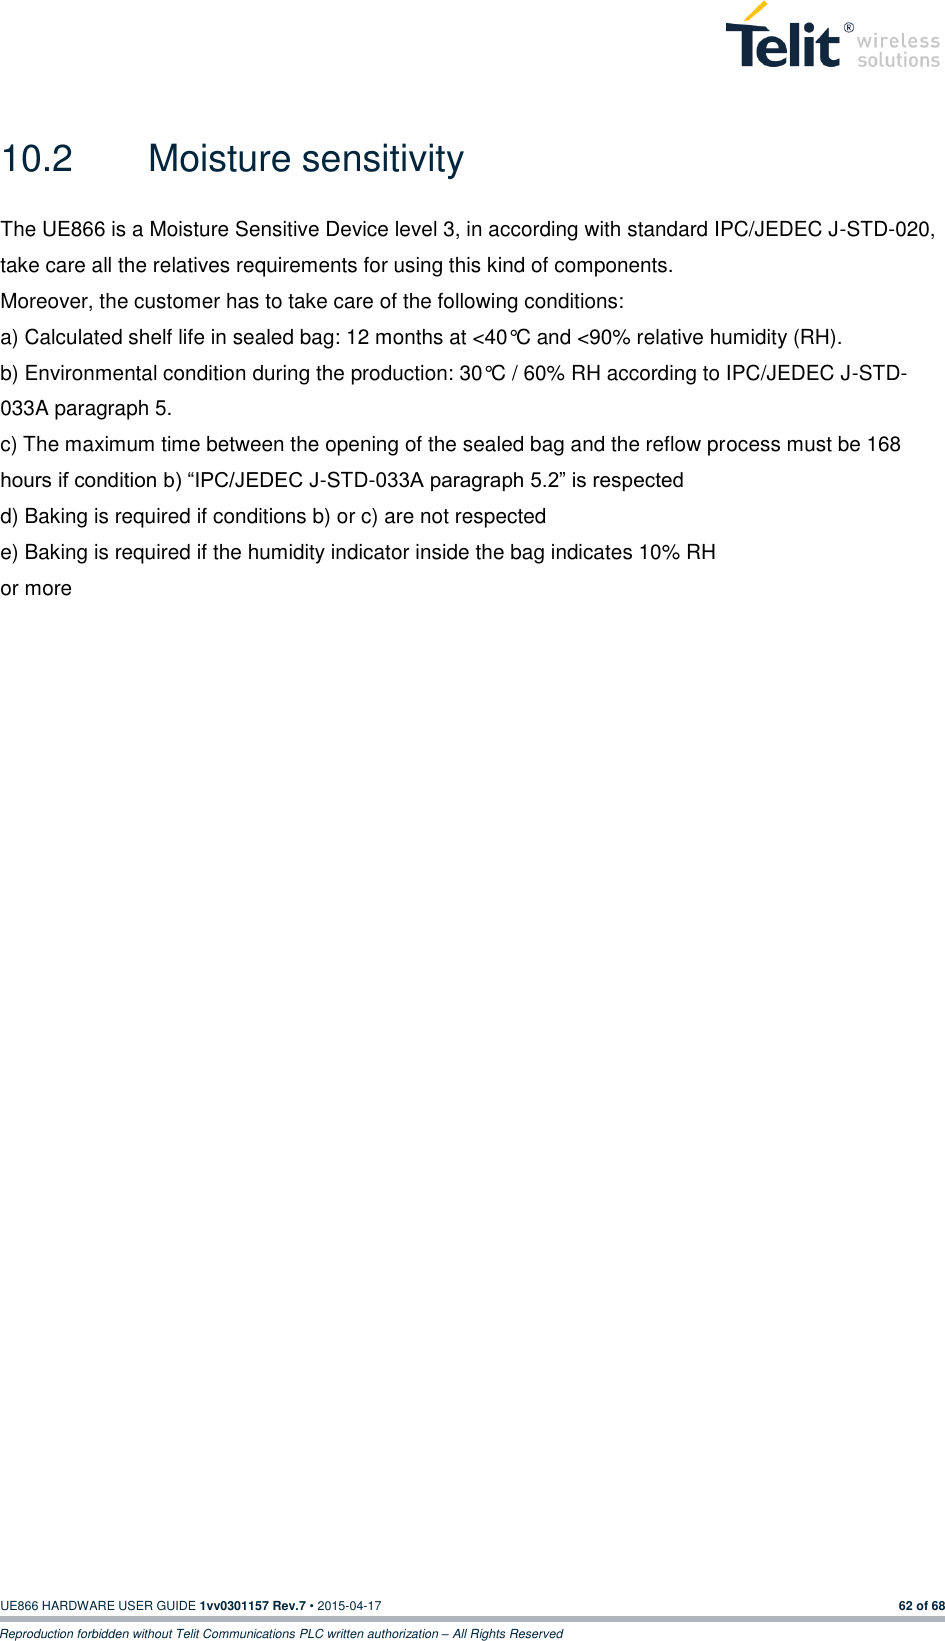  UE866 HARDWARE USER GUIDE 1vv0301157 Rev.7 • 2015-04-17 62 of 68 Reproduction forbidden without Telit Communications PLC written authorization – All Rights Reserved  10.2  Moisture sensitivity   The UE866 is a Moisture Sensitive Device level 3, in according with standard IPC/JEDEC J-STD-020, take care all the relatives requirements for using this kind of components. Moreover, the customer has to take care of the following conditions: a) Calculated shelf life in sealed bag: 12 months at &lt;40°C and &lt;90% relative humidity (RH). b) Environmental condition during the production: 30°C / 60% RH according to IPC/JEDEC J-STD-033A paragraph 5. c) The maximum time between the opening of the sealed bag and the reflow process must be 168 hours if condition b) “IPC/JEDEC J-STD-033A paragraph 5.2” is respected d) Baking is required if conditions b) or c) are not respected e) Baking is required if the humidity indicator inside the bag indicates 10% RH or more      